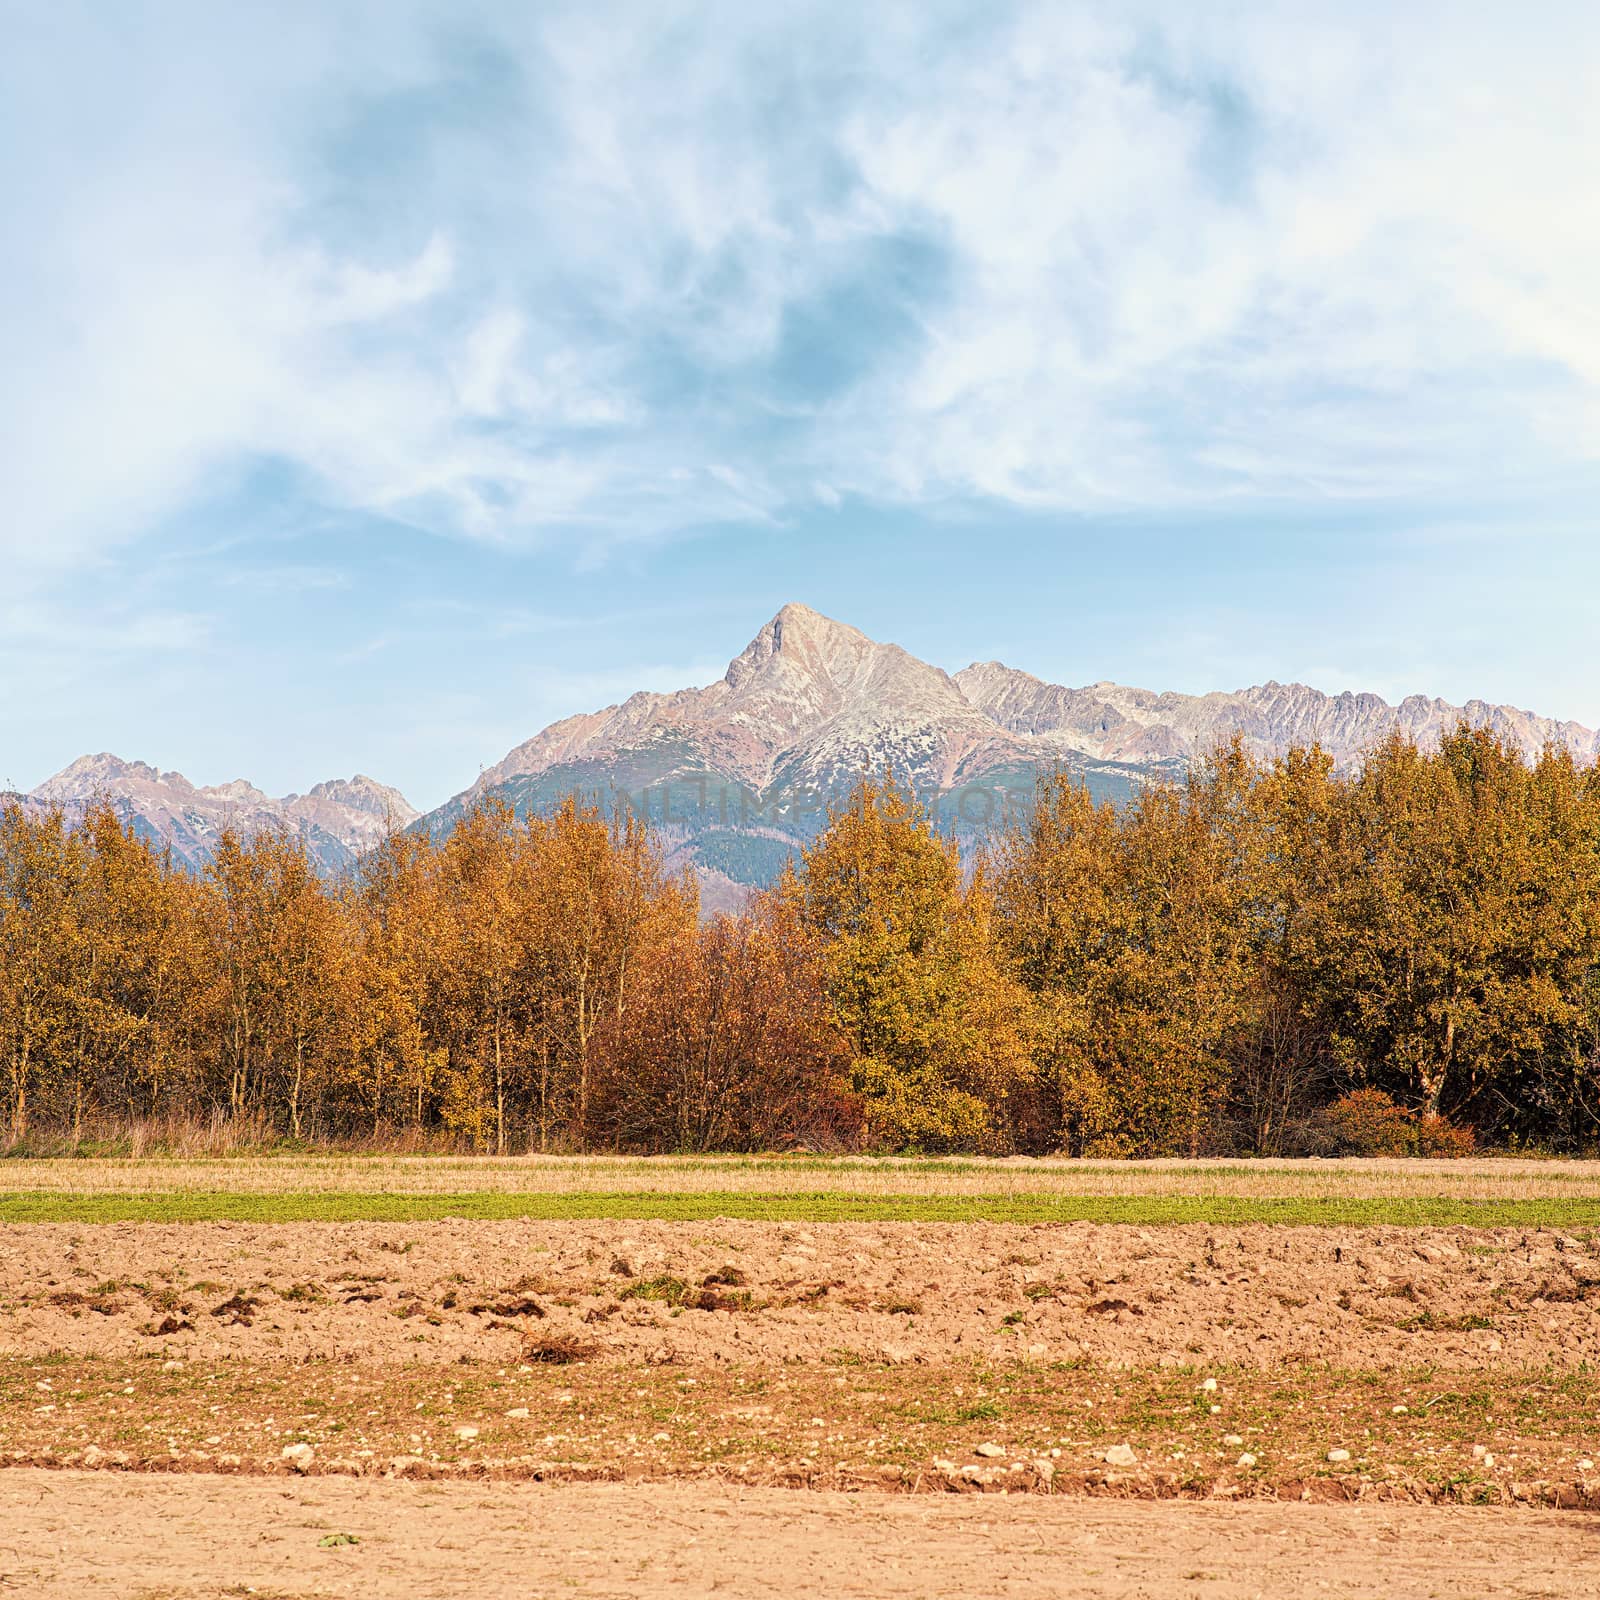 Mount Krivan peak Slovak symbol with blurred autumn coloured trees and dry field in foreground, Typical autumnal scenery of Liptov region, Slovakia by Ivanko